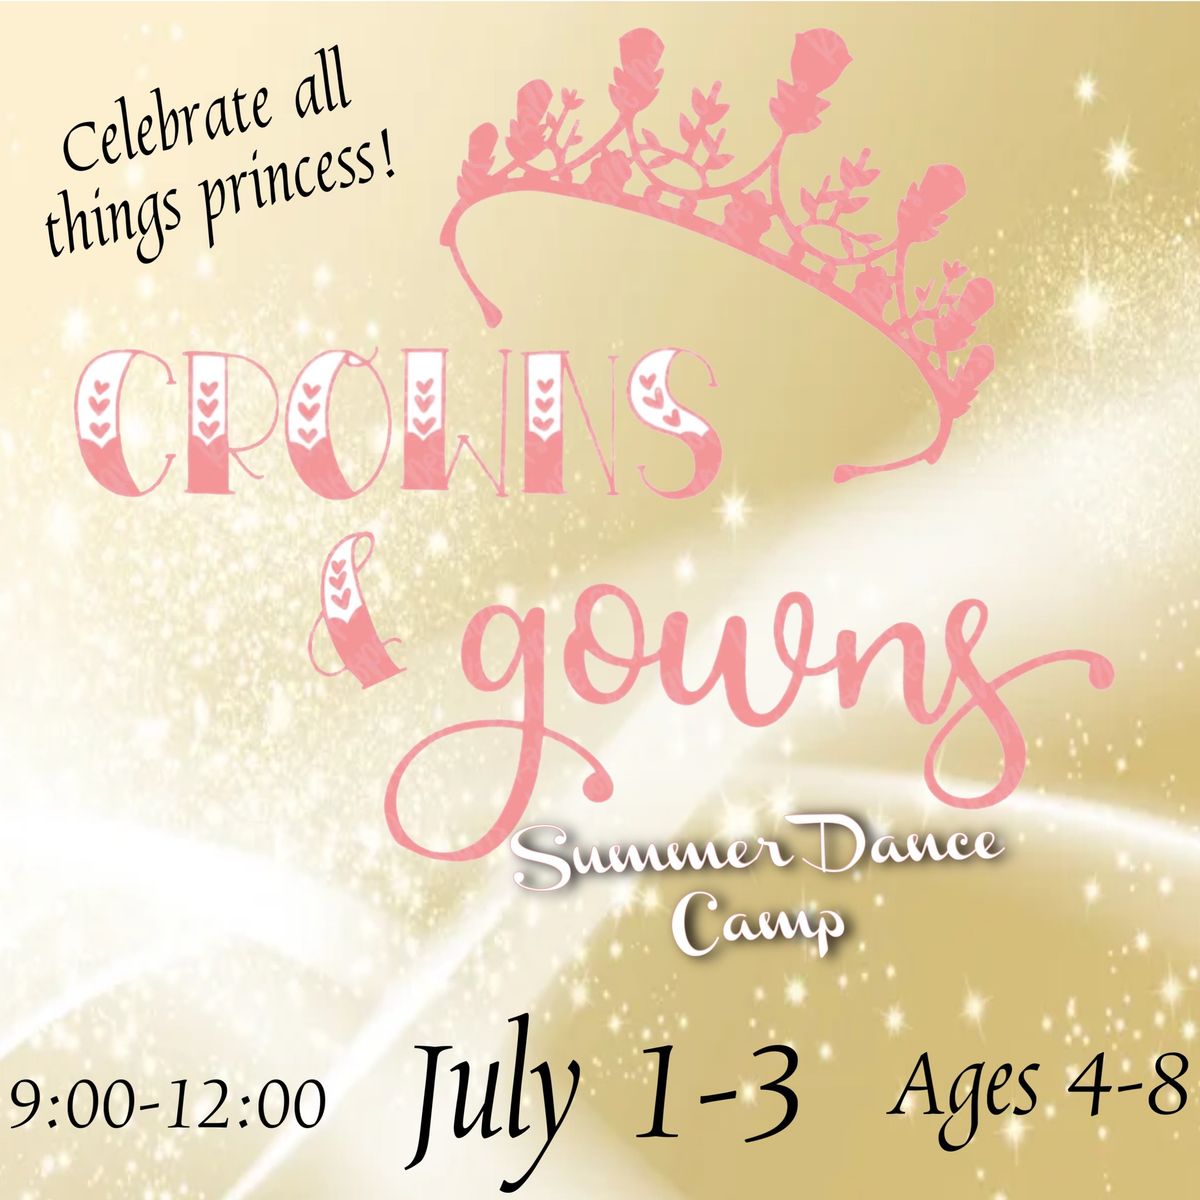 Crowns & Gowns Summer Dance Camp